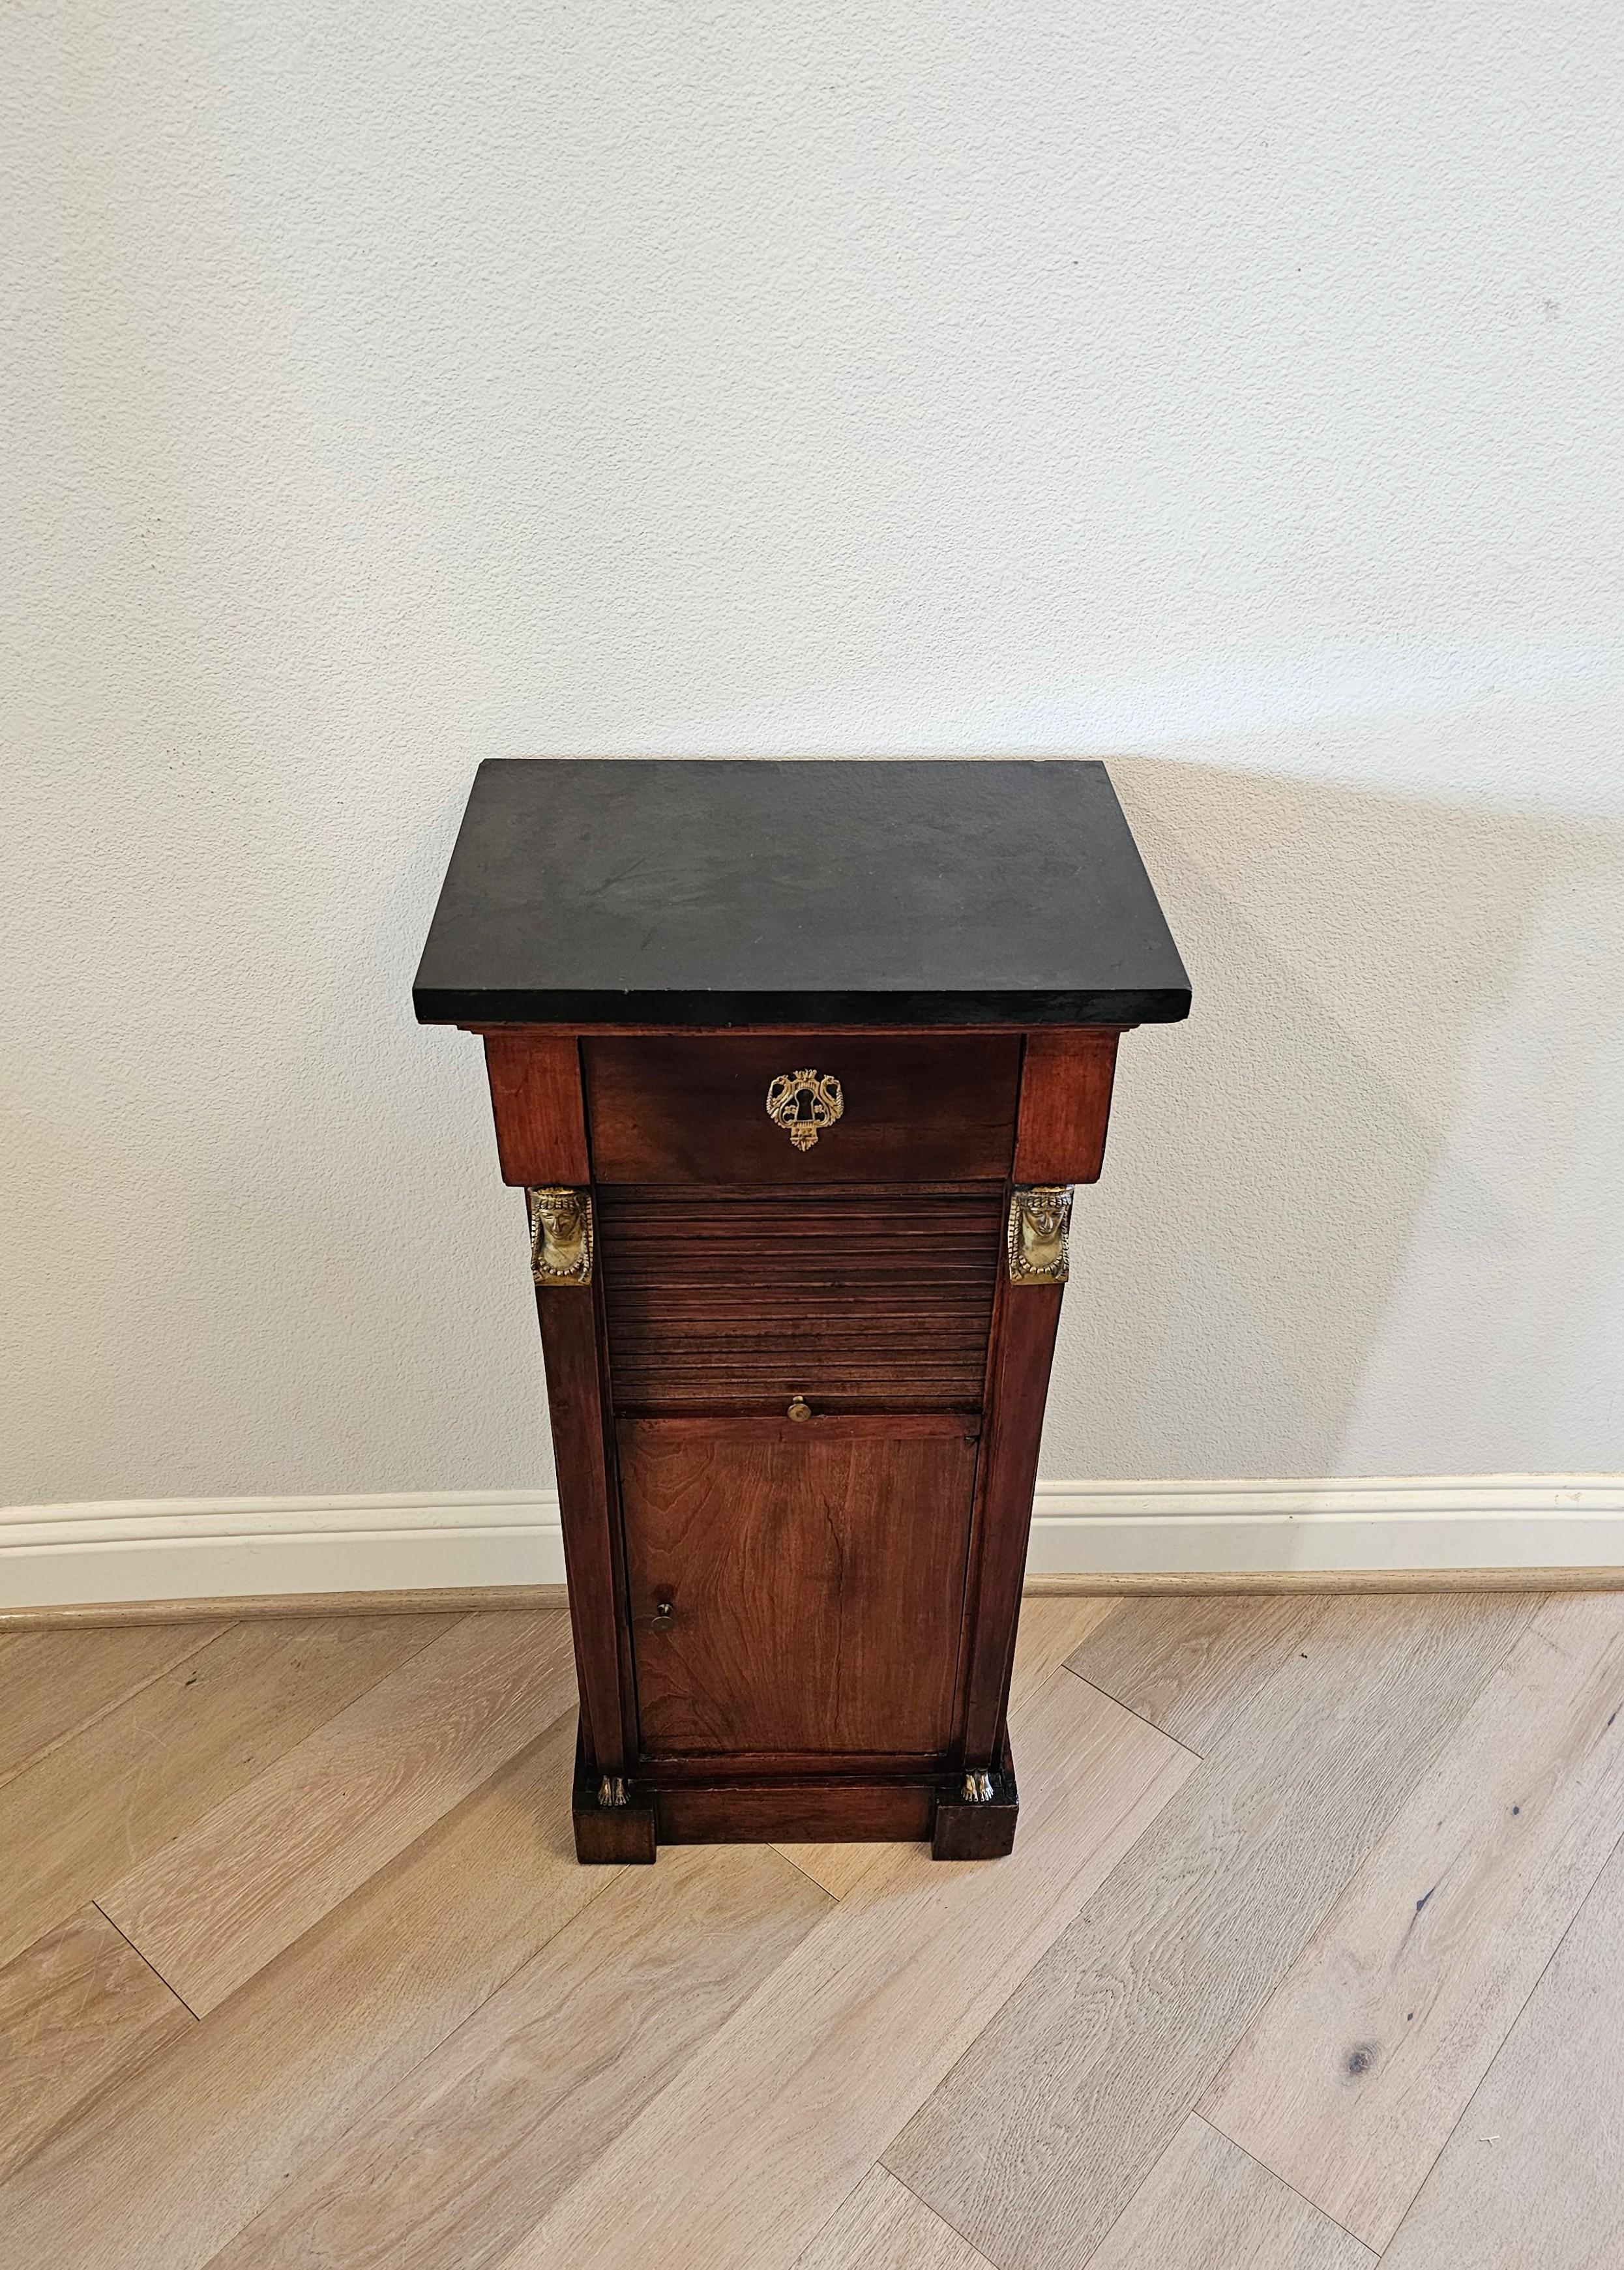 19th Century Balkans Empire Style Gilt Bronze Mounted Mahogany Nightstand  In Good Condition For Sale In Forney, TX